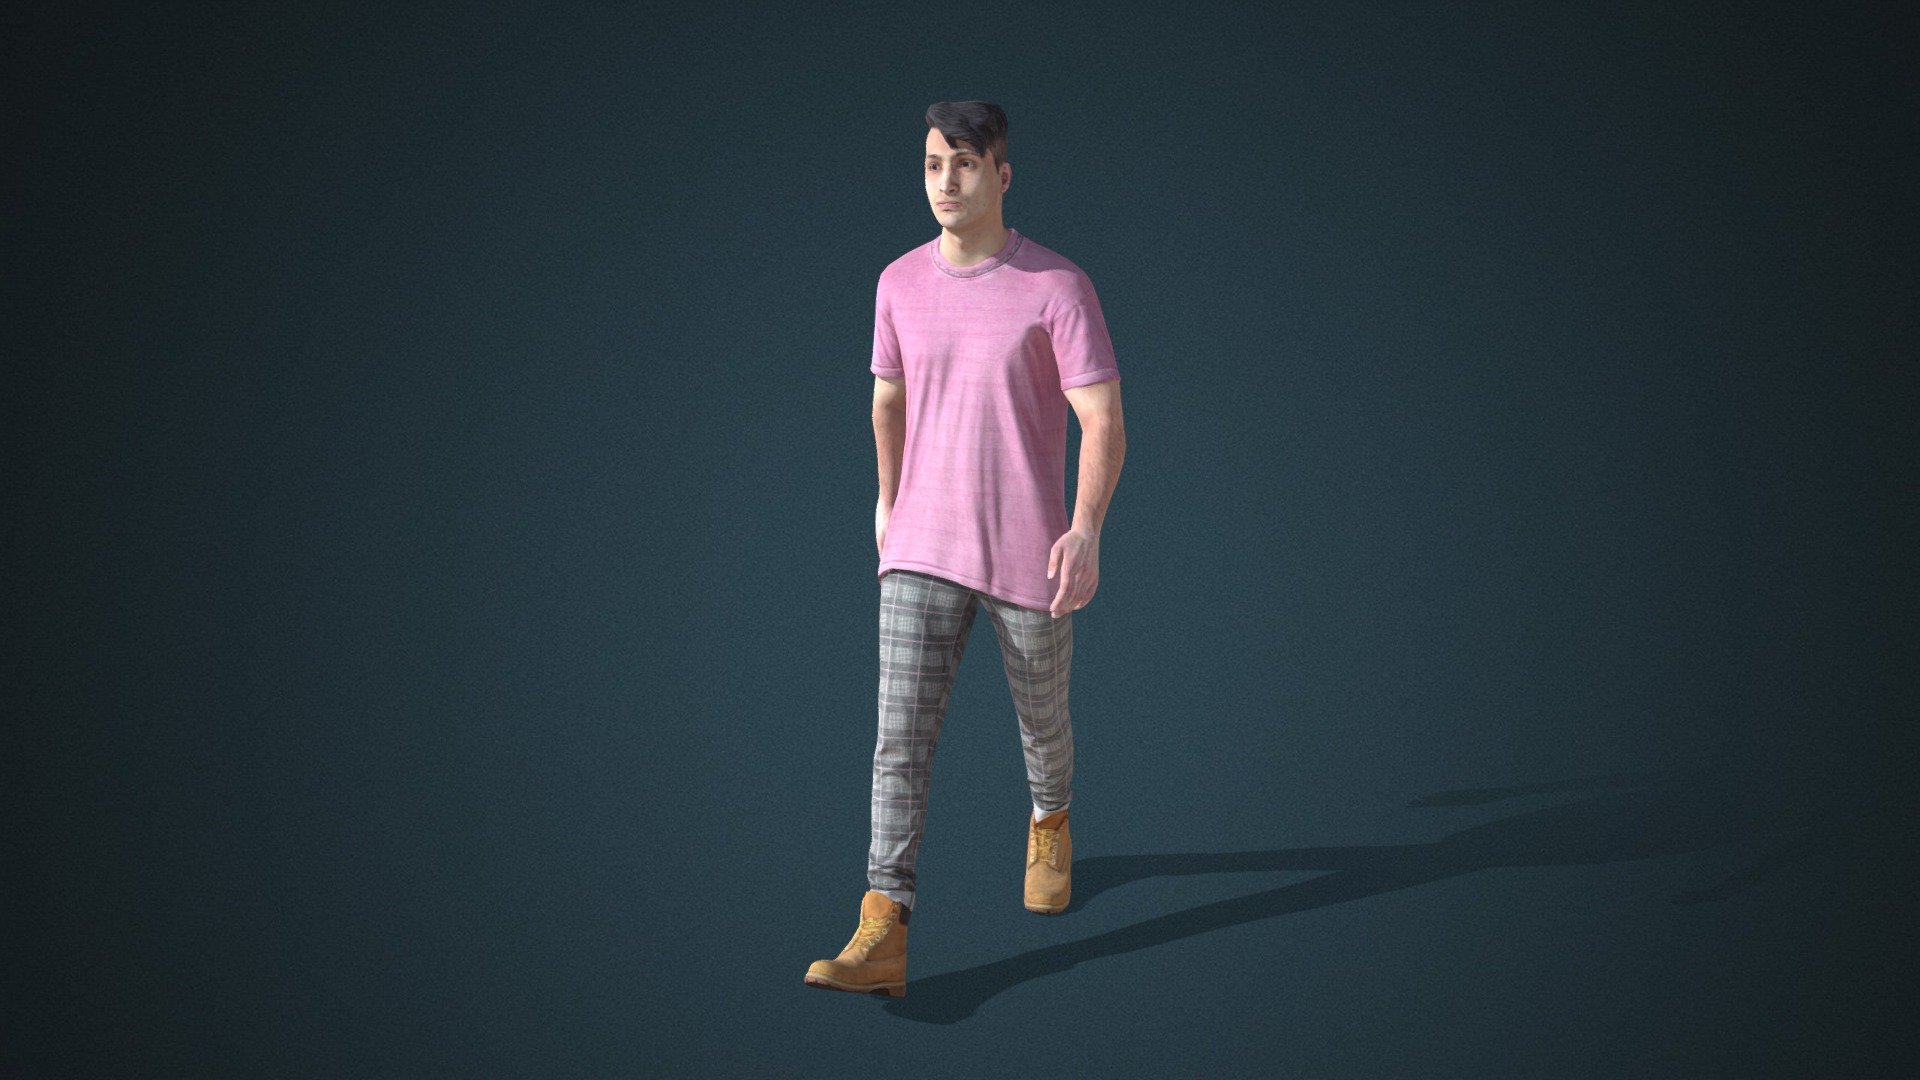 Do you like this model?  Free Download more models, motions and auto rigging tool AccuRIG (Value: $150+) on ActorCore
 

This model includes 2 mocap animations: 
Modern M_Talk,Male_walk. Get more free motions

Design for high-performance crowd animation.

Buy full pack and Save 20%+: Young Fashion Vol.3


SPECIFICATIONS

✔ Geometry : 7K~10K Quads, one mesh

✔ Material : One material with changeable colors.

✔ Texture Resolution : 4K

✔ Shader : PBR, Diffuse, Normal, Roughness, Metallic, Opacity

✔ Rigged : Facial and Body (shoulders, fingers, toes, eyeballs, jaw)

✔ Blendshape : 122 for facial expressions and lipsync

✔ Compatible with iClone AccuLips, Facial ExPlus, and traditional lip-sync.


About Reallusion ActorCore

ActorCore offers the highest quality 3D asset libraries for mocap motions and animated 3D humans for crowd rendering 3d model